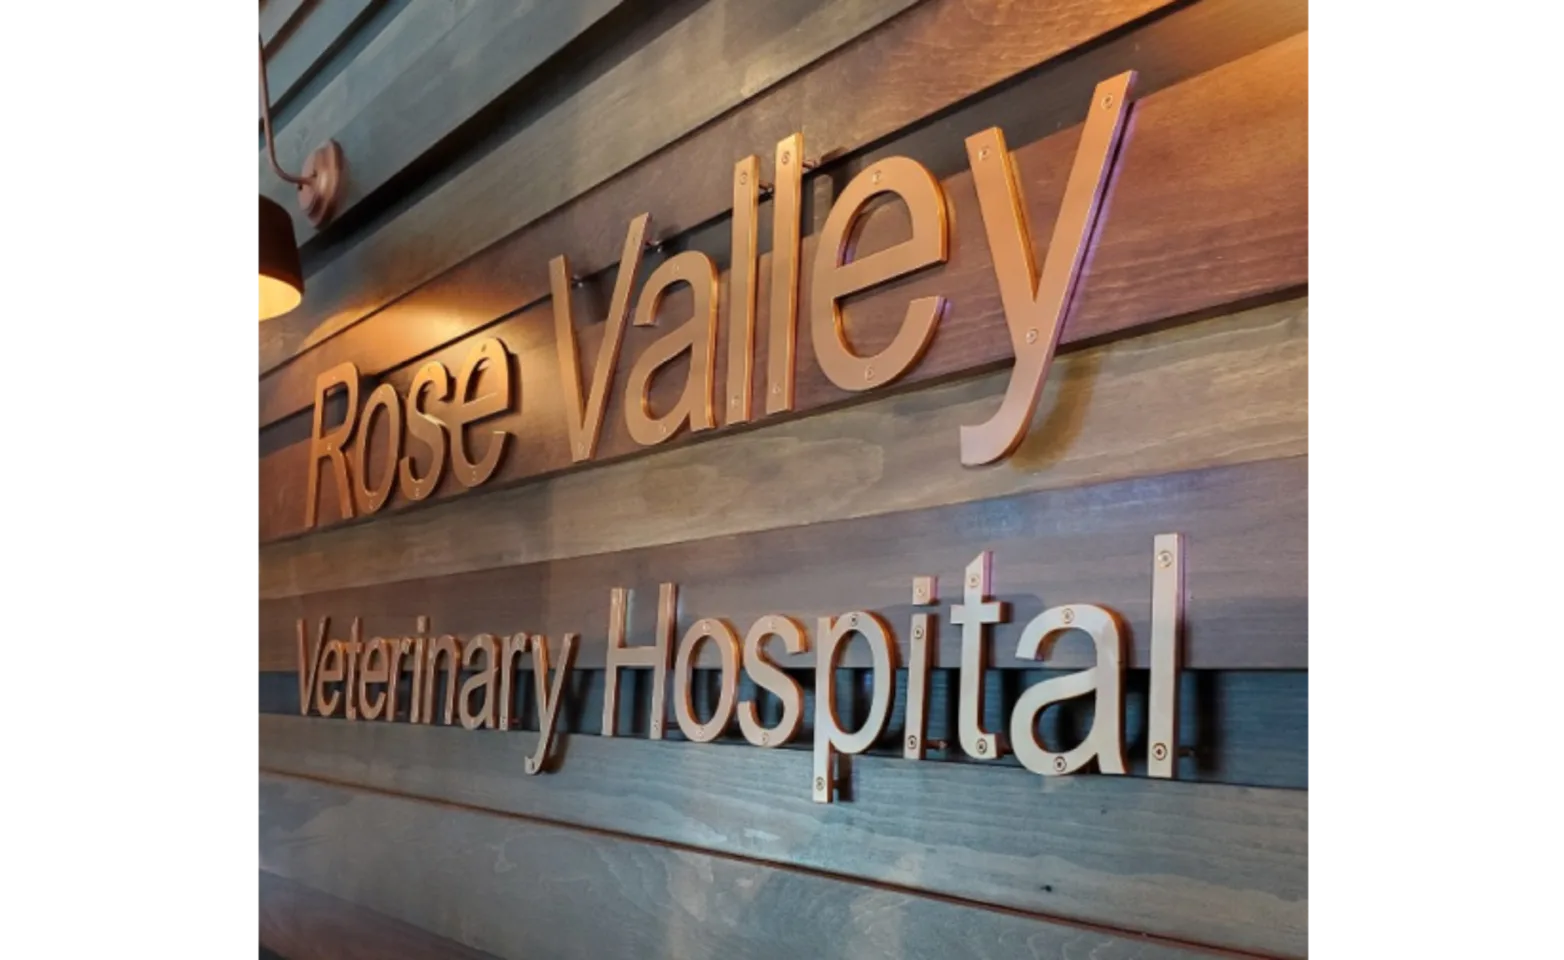 Rose Valley sign on a wall